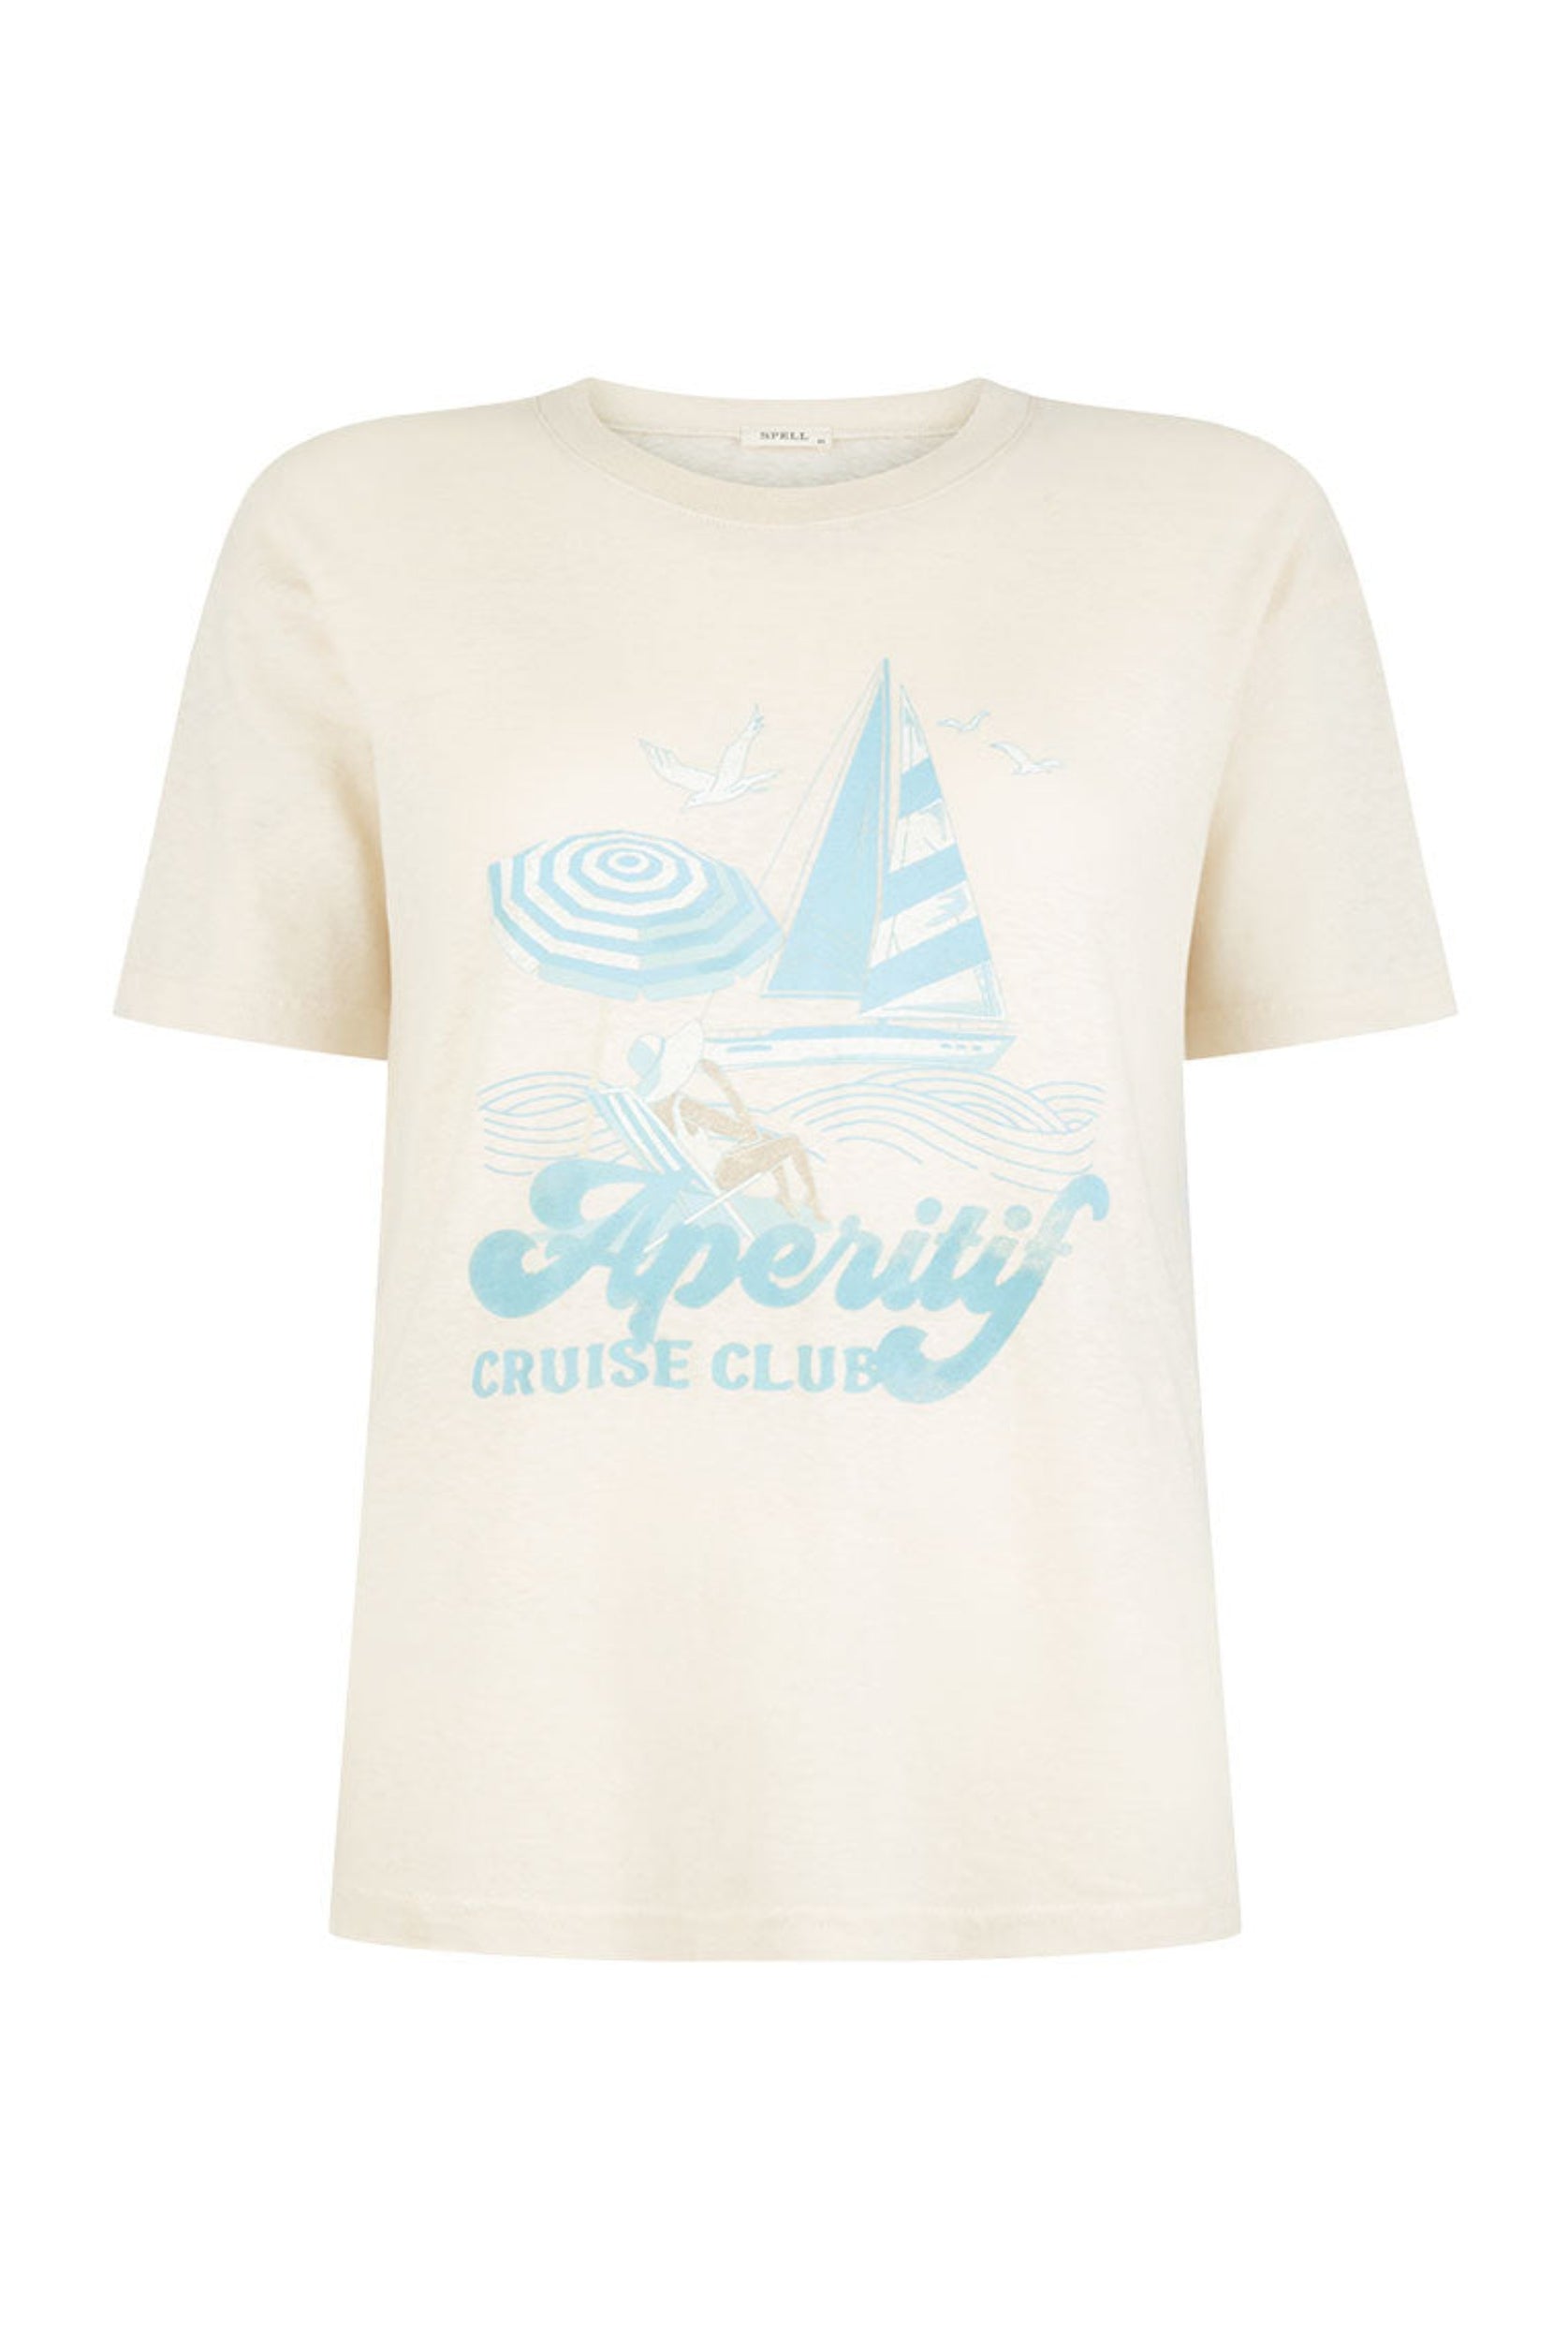 Cruise Club Tee in Off White from Spell